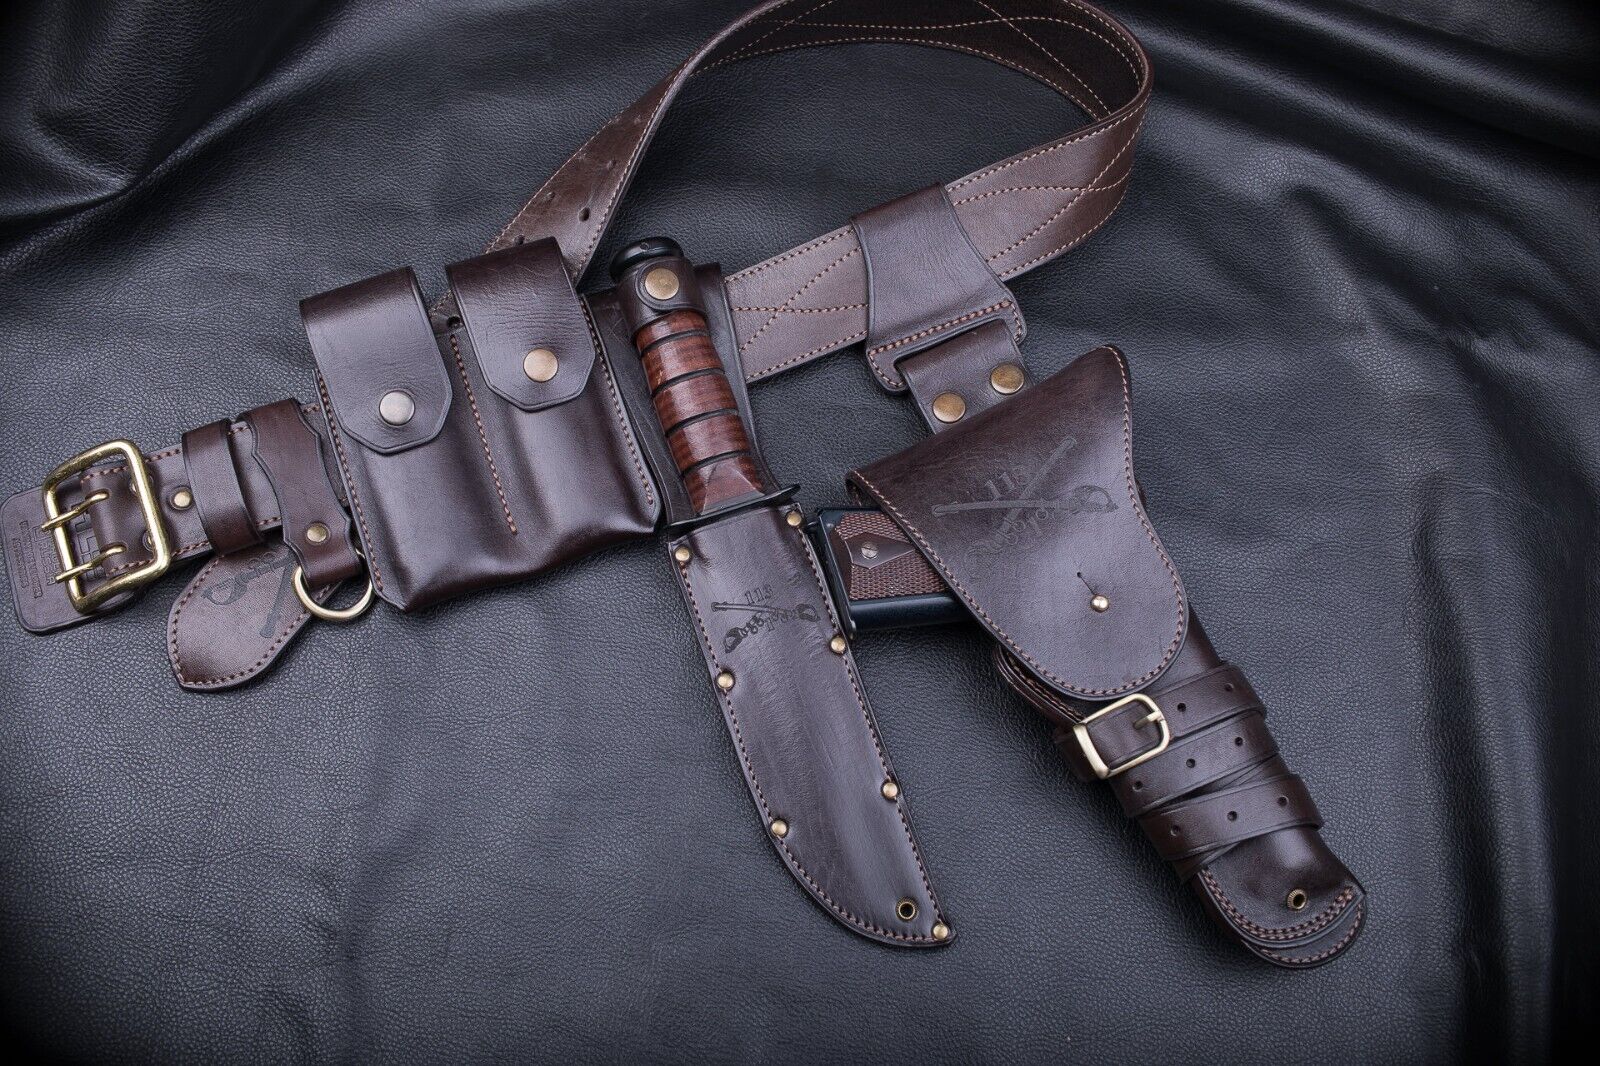 Colt 1911 Custom Made Leather Holster | Vintage Look | Unique Design Retro Style